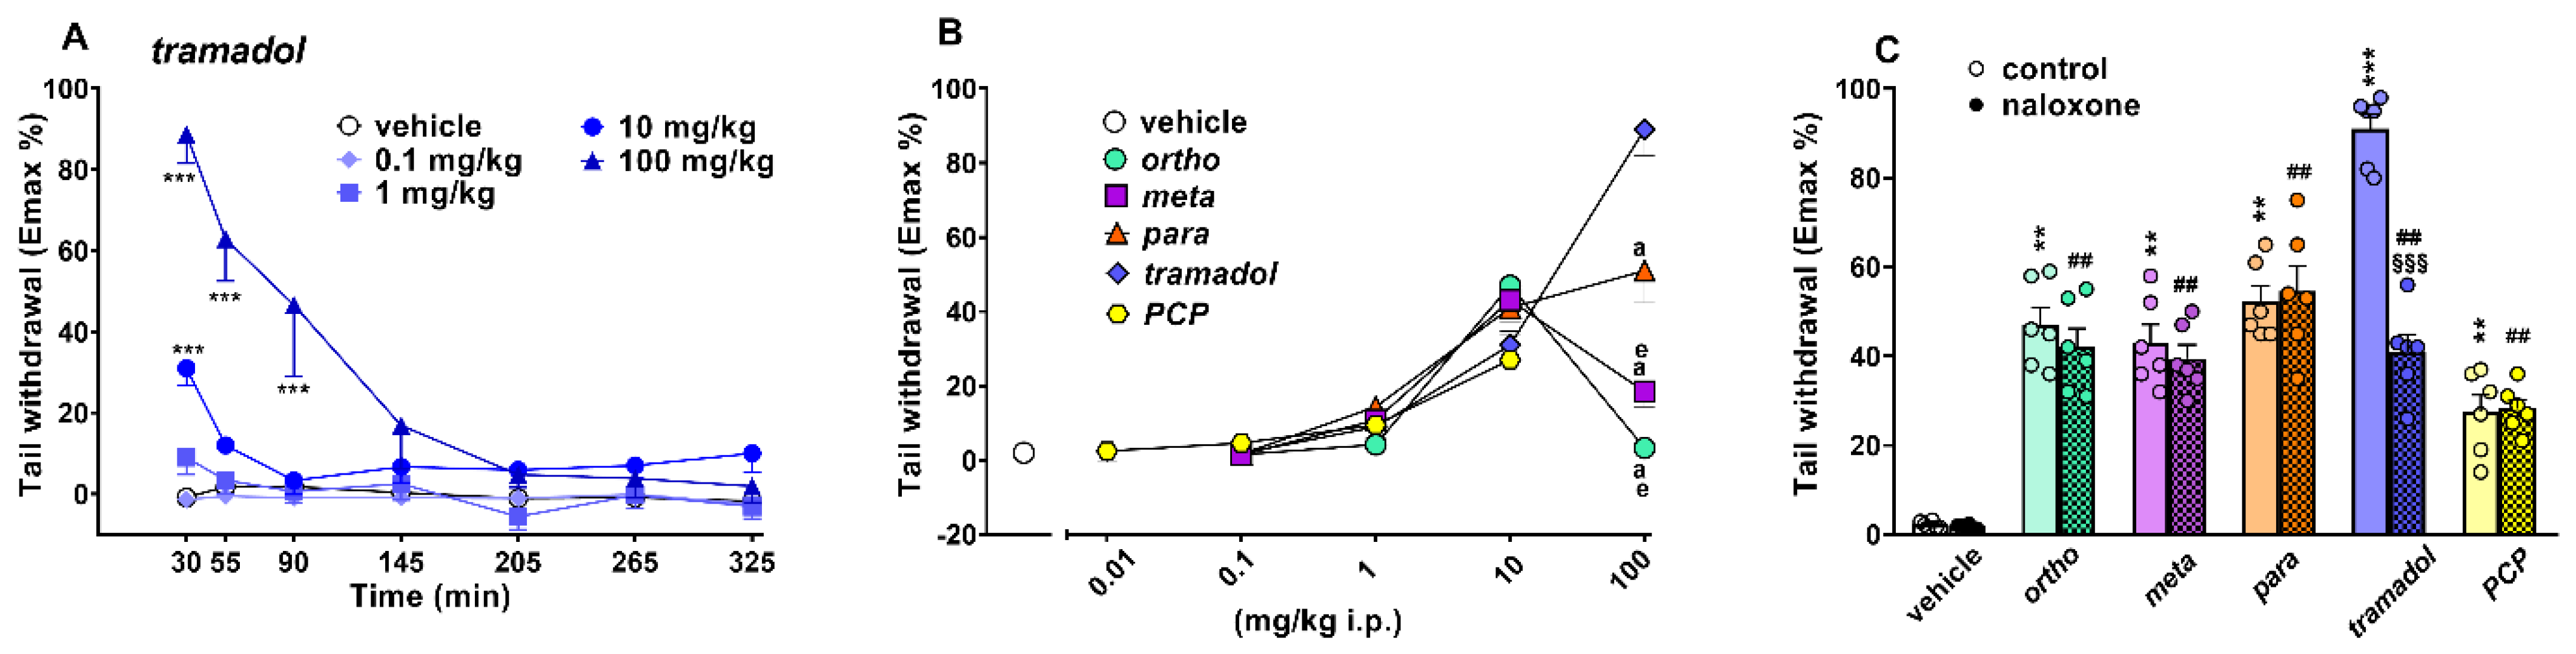 IJMS | Free Full-Text | In Vitro and In Vivo Pharmaco-Toxicological  Characterization of 1-Cyclohexyl-x-methoxybenzene Derivatives in Mice:  Comparison with Tramadol and PCP | HTML